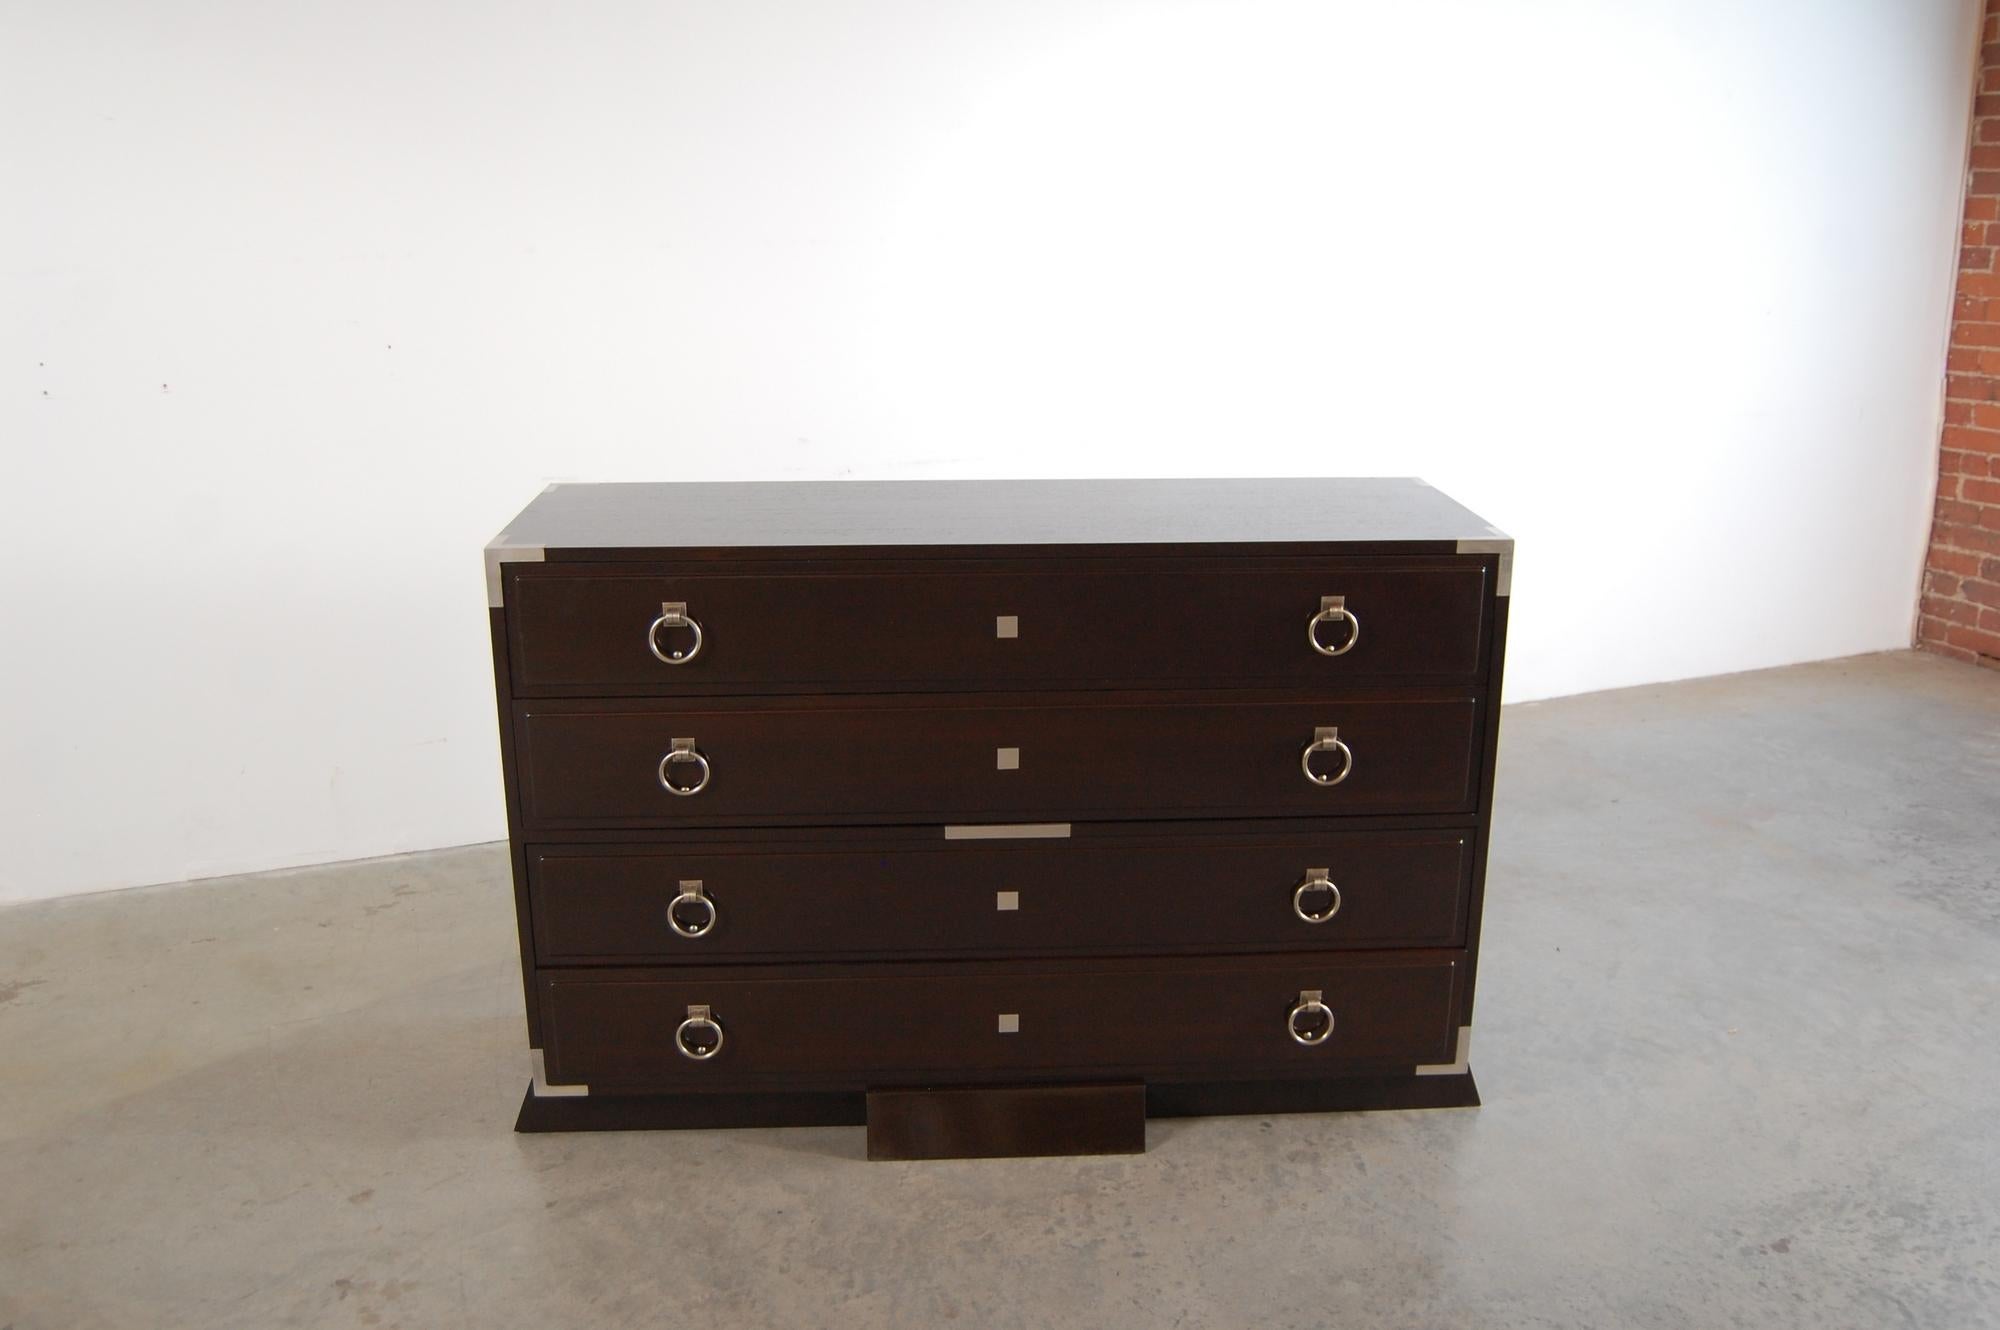 Very elegant four drawer cabinet, in the manner of Dominique. Constructed of Mahogany, with inlaid metal details, and beautifully crafted hardware. Cabinet measures 55 1/2